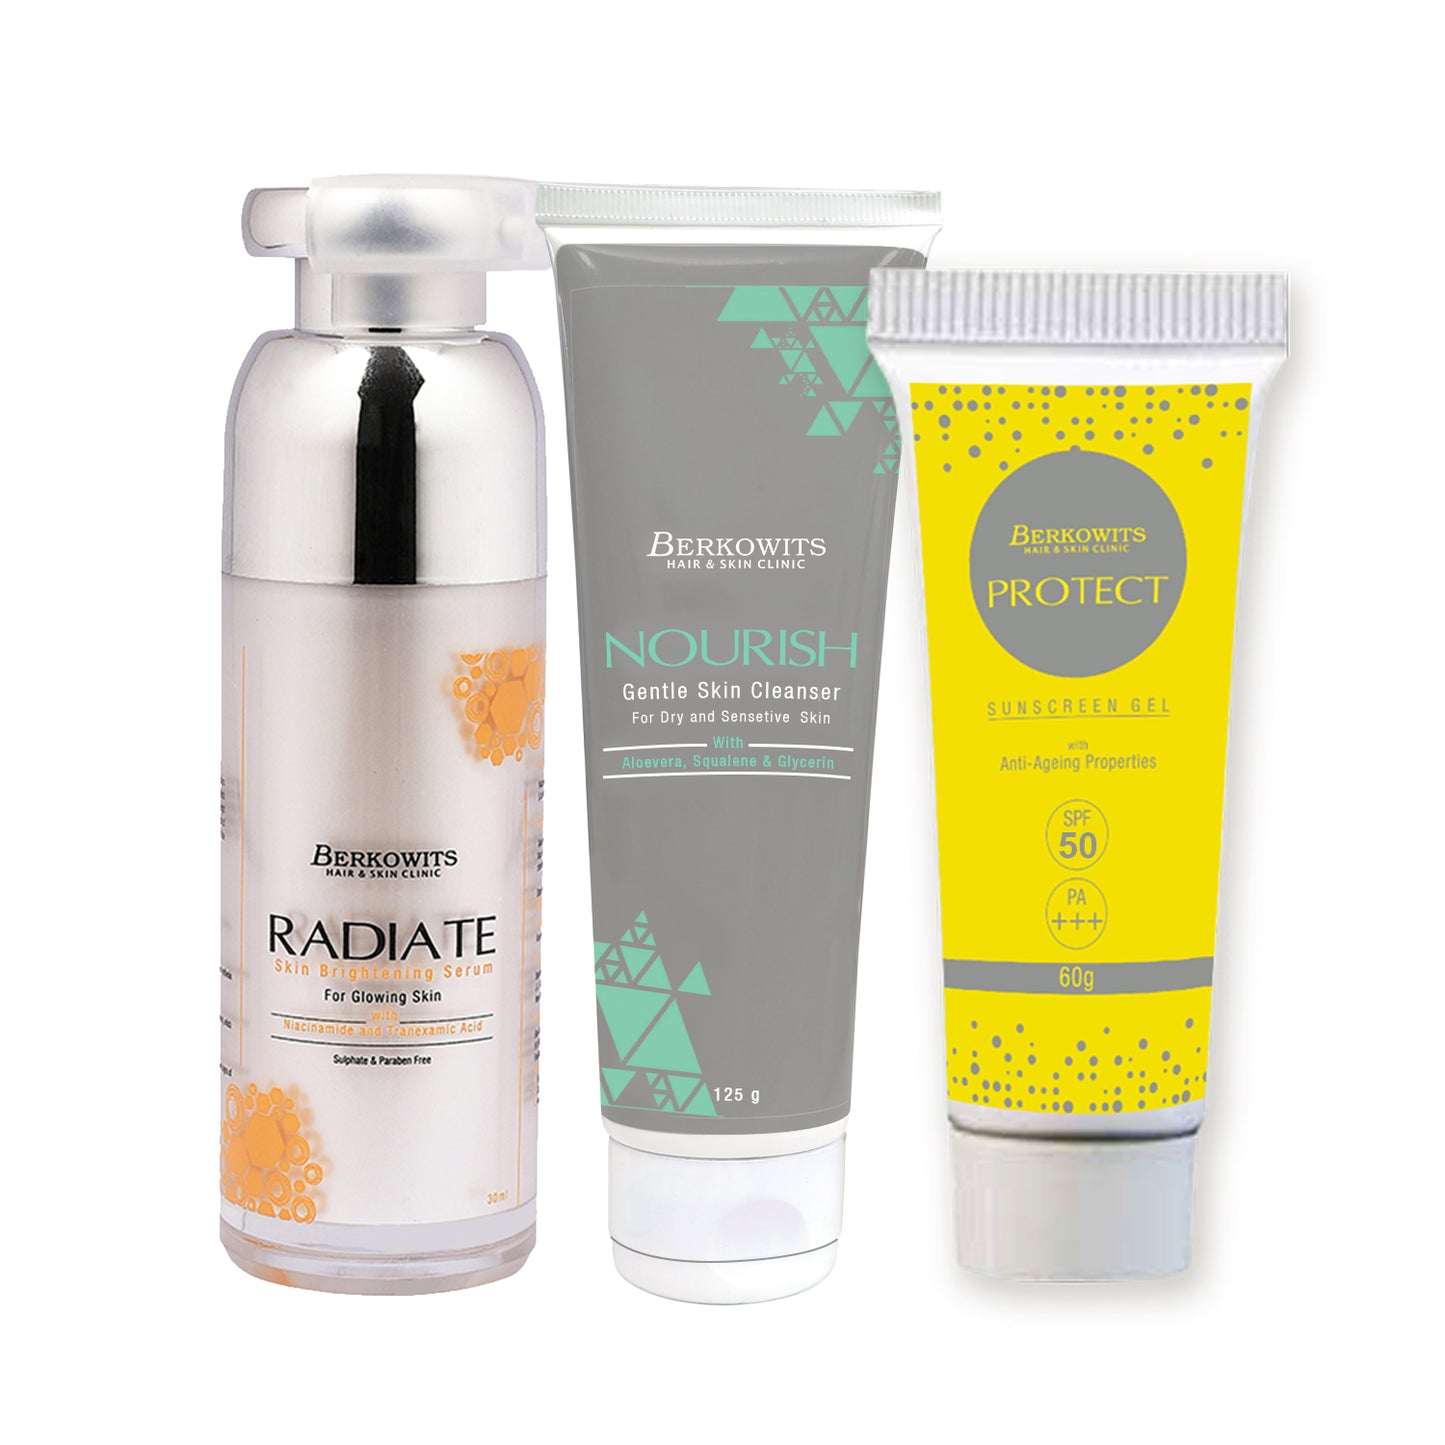 Winter Glowing Skincare Regime with Sunscreen and Cleanser (215g)